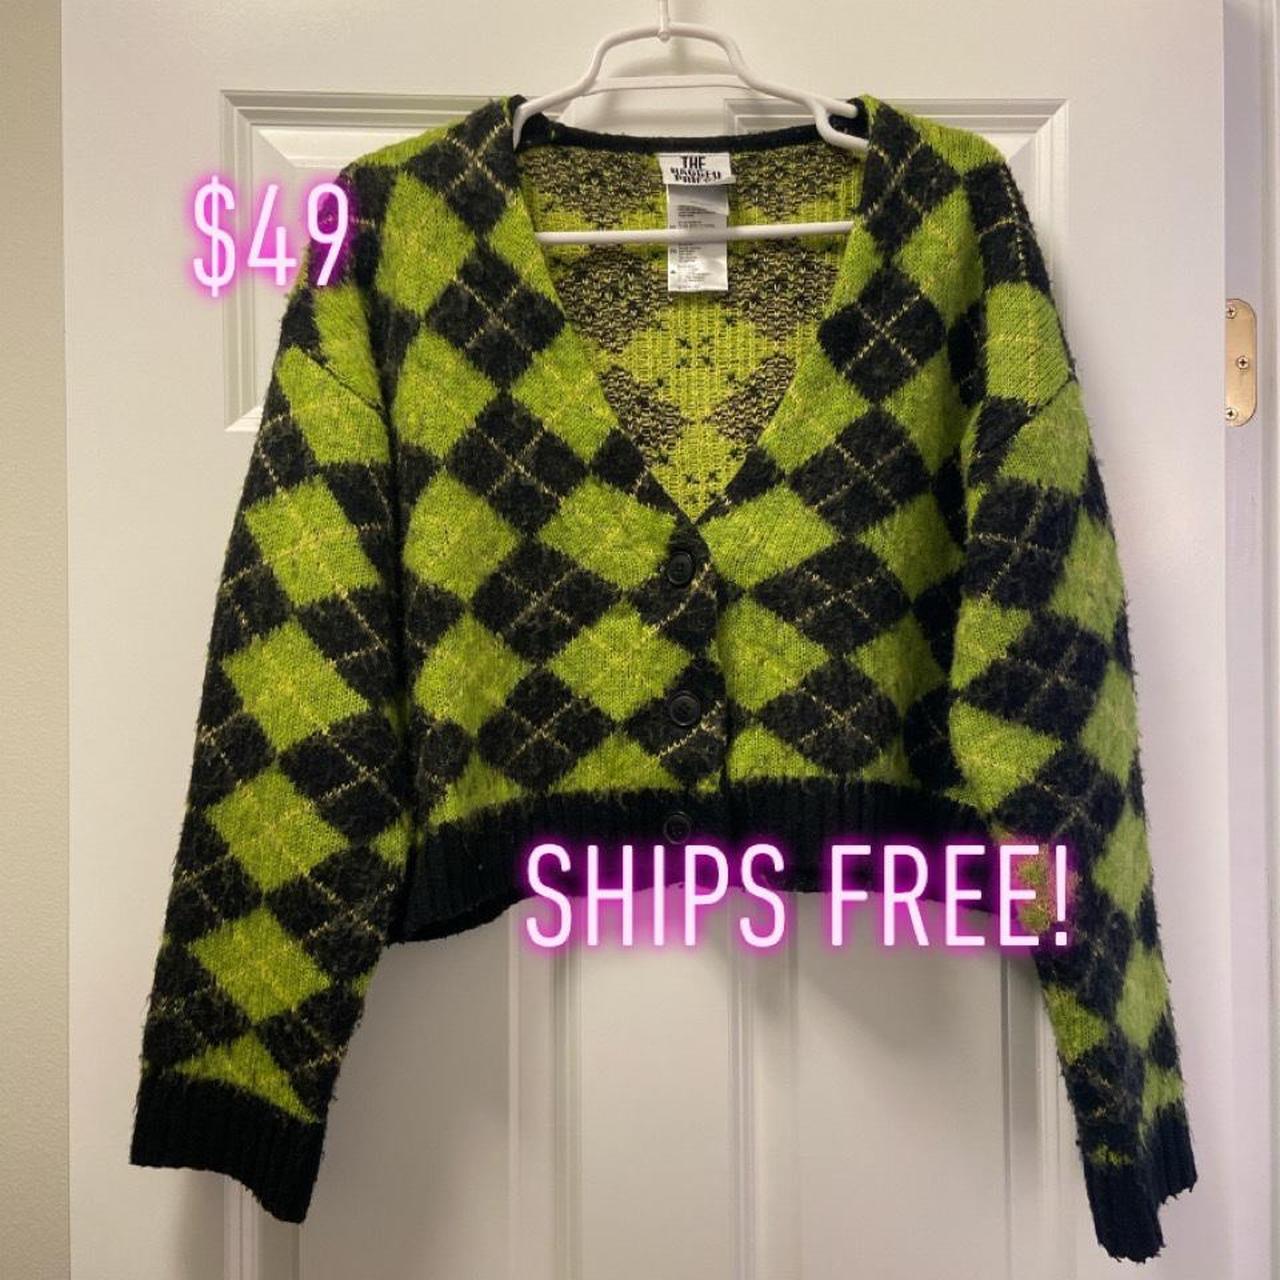 The Ragged Priest Women's Black and Green Cardigan